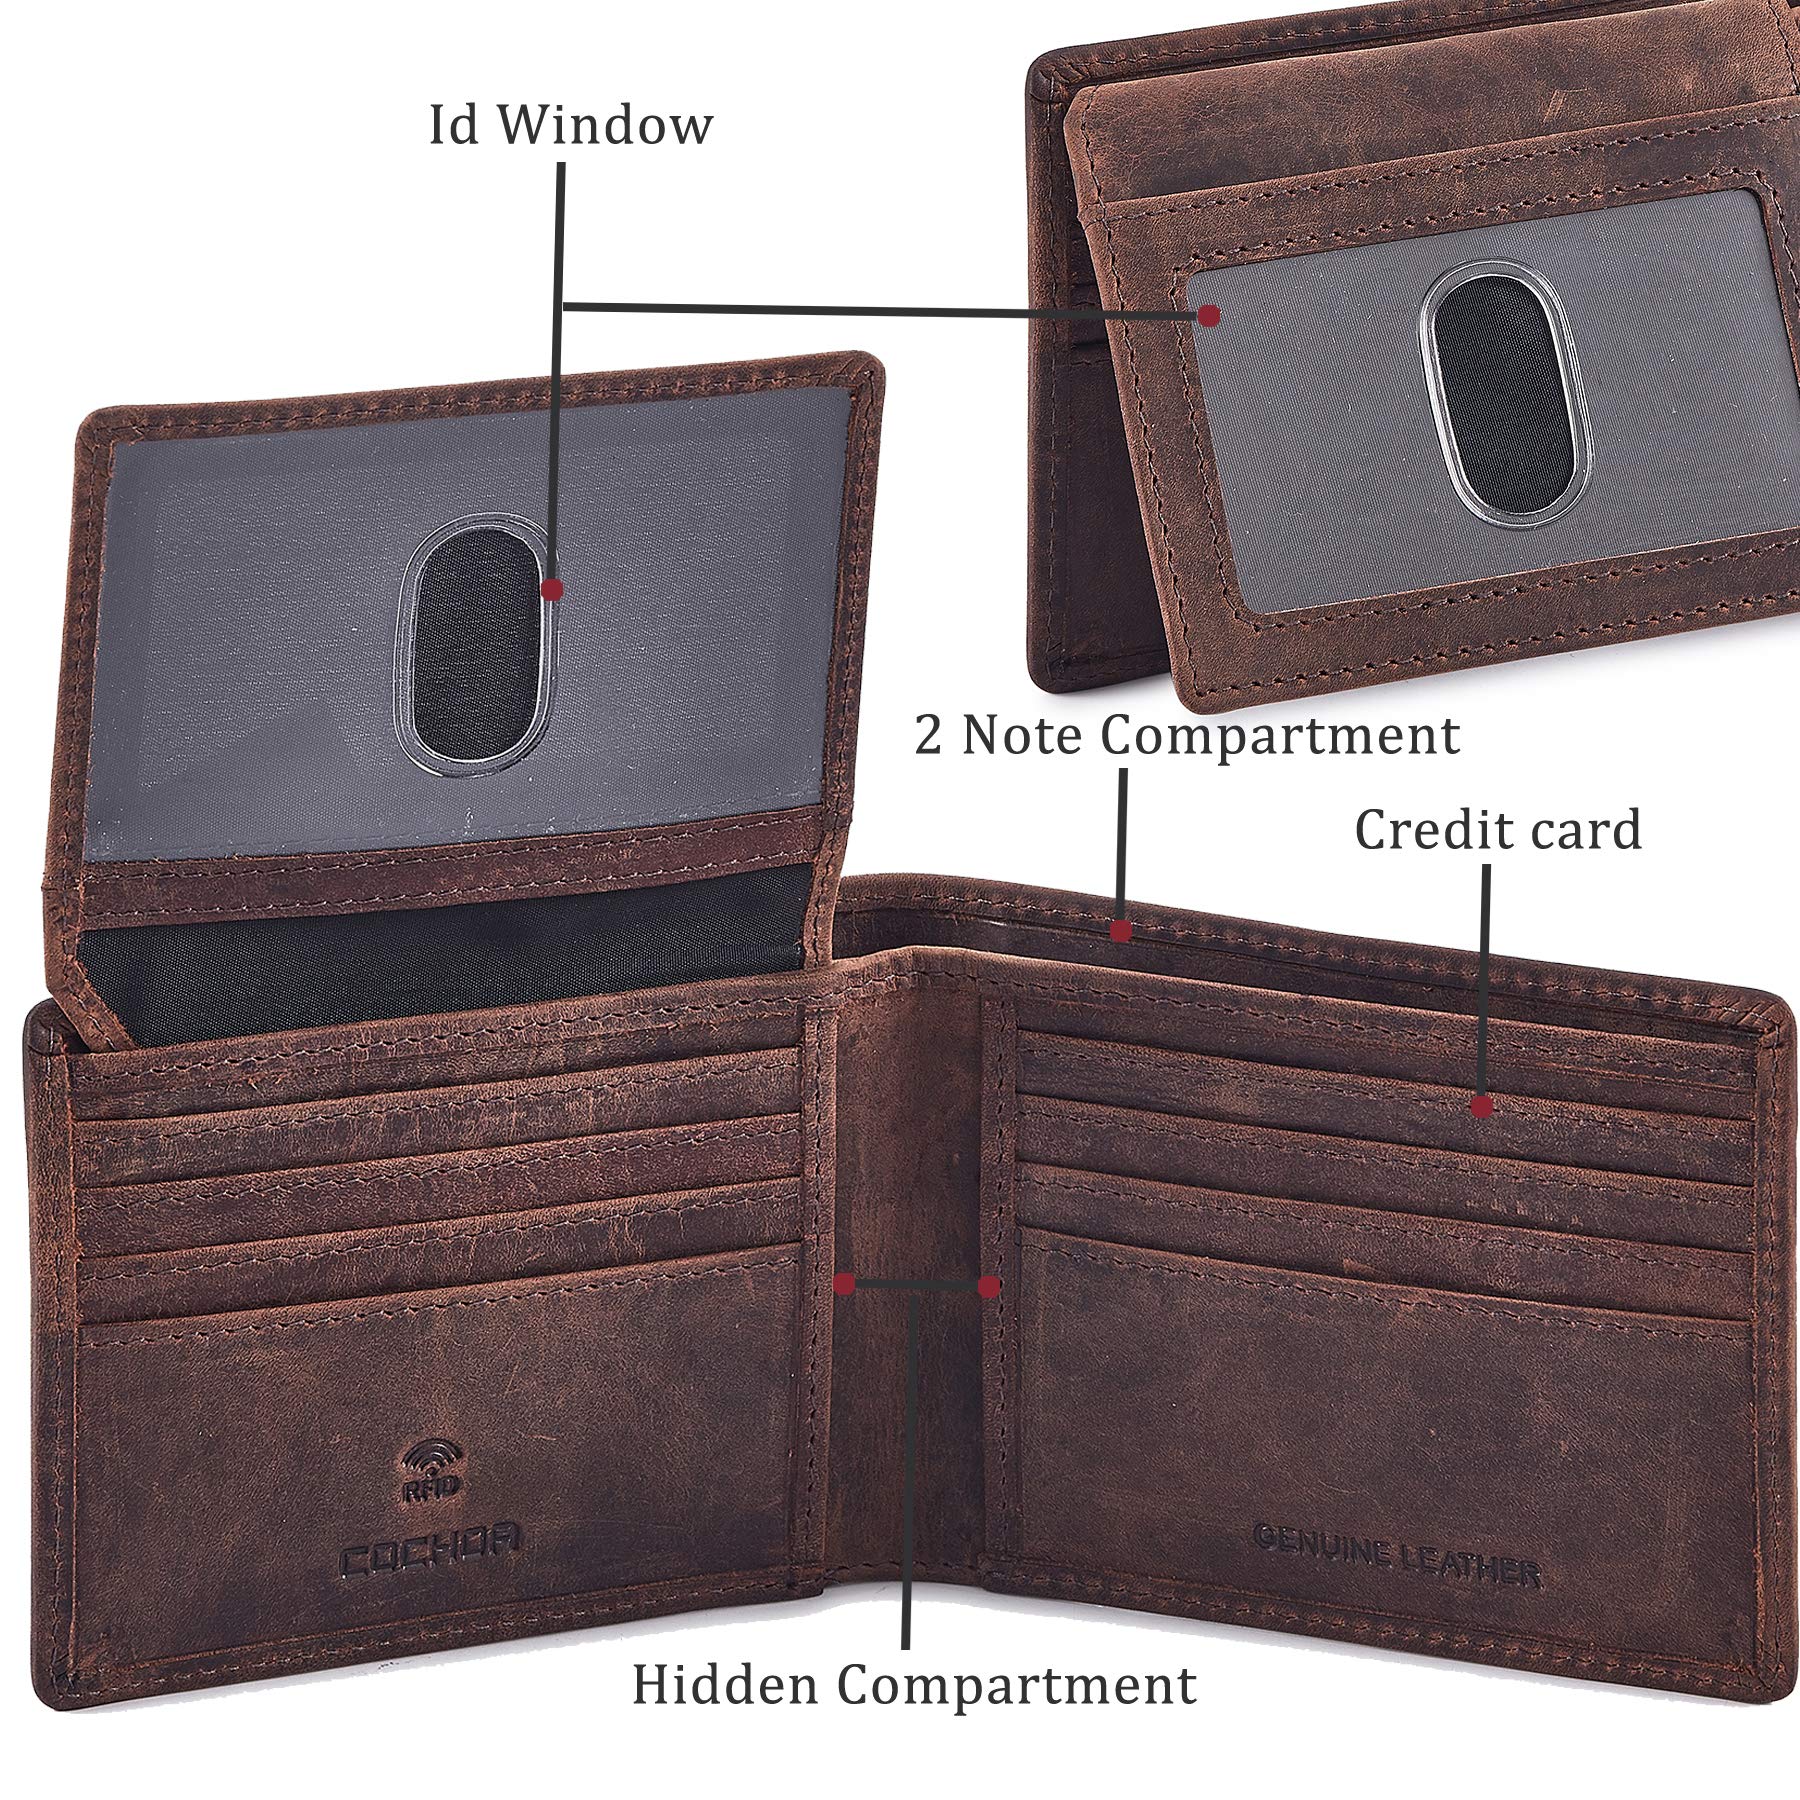 Cochoa Men's Real Leather RFID Blocking Bifold Wallet Stylish Anti Theft Security With 2 ID Window